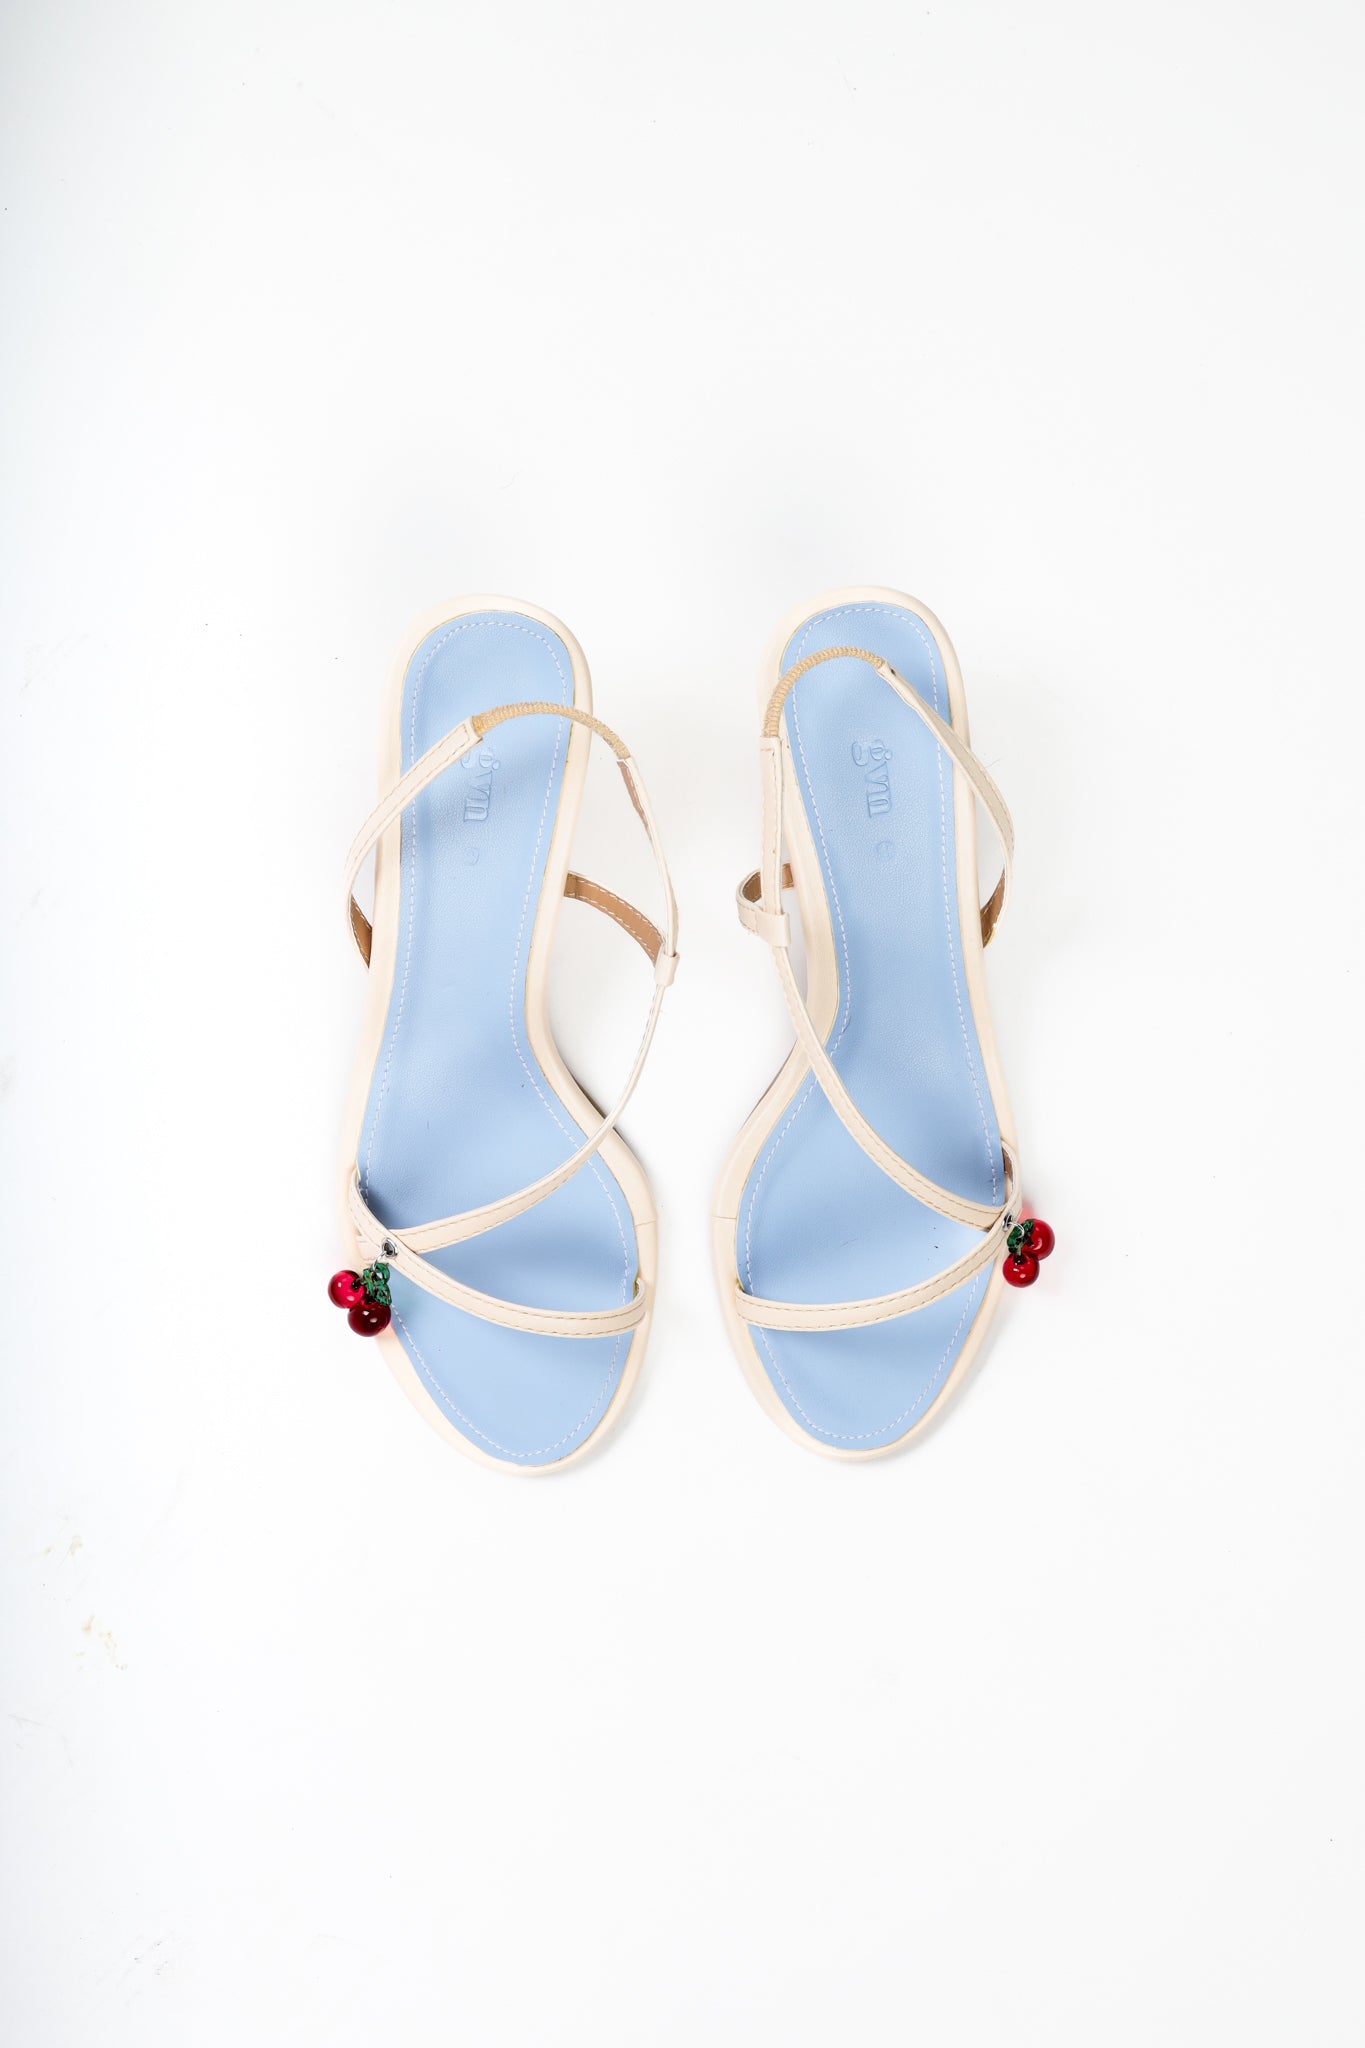 Paloma Heels in Blueberry